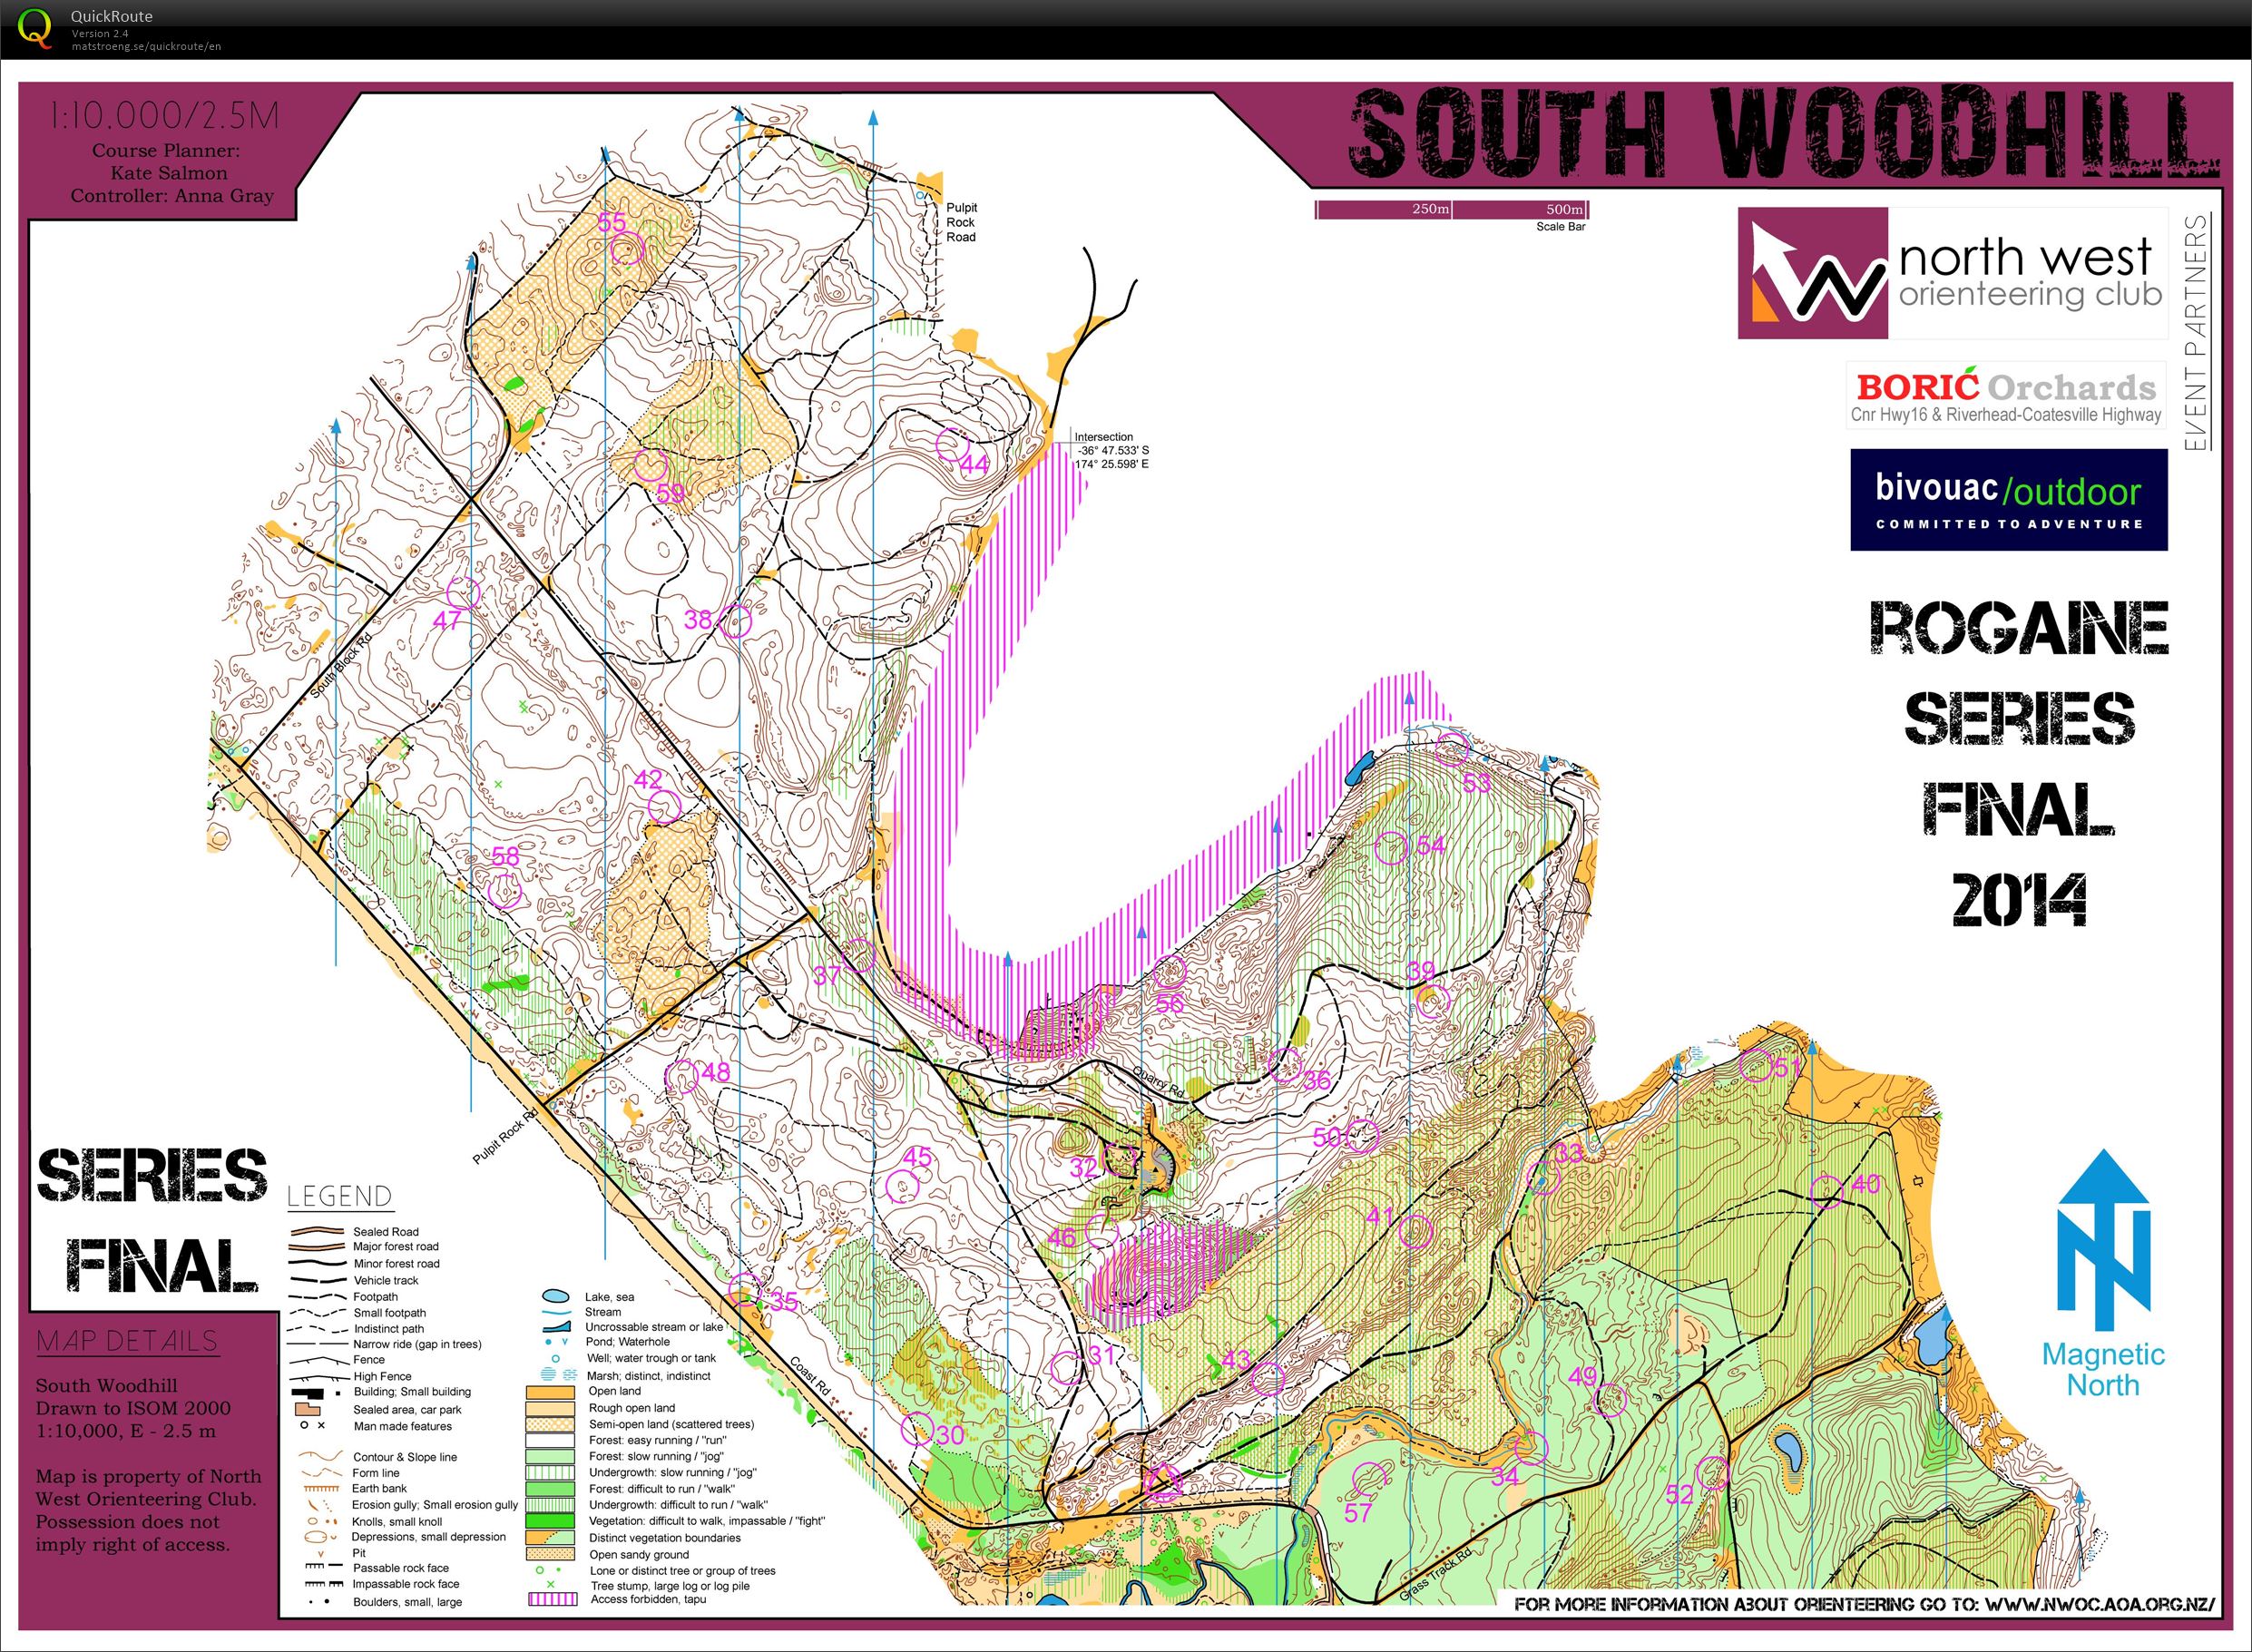 Rogaine Series - Part 4 - South Woodhill (08.06.2014)